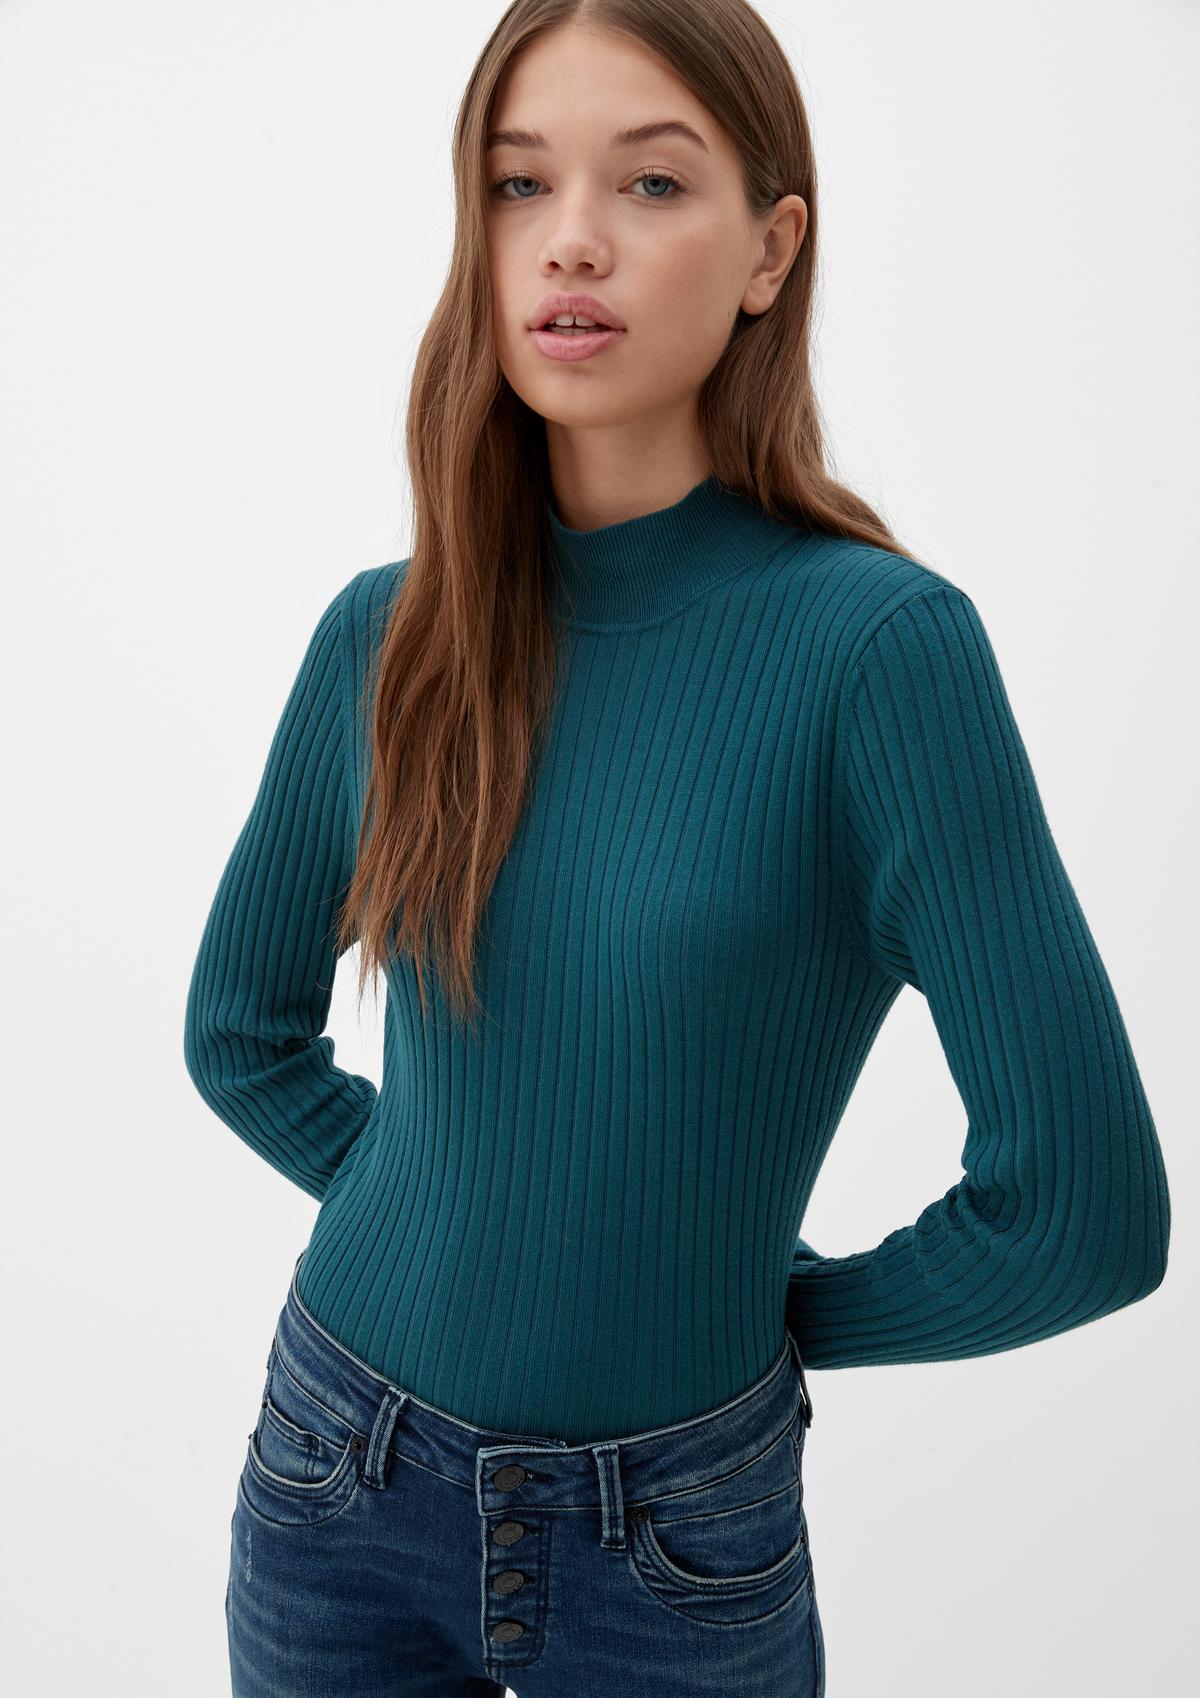 Knit jumper with a stand-up collar